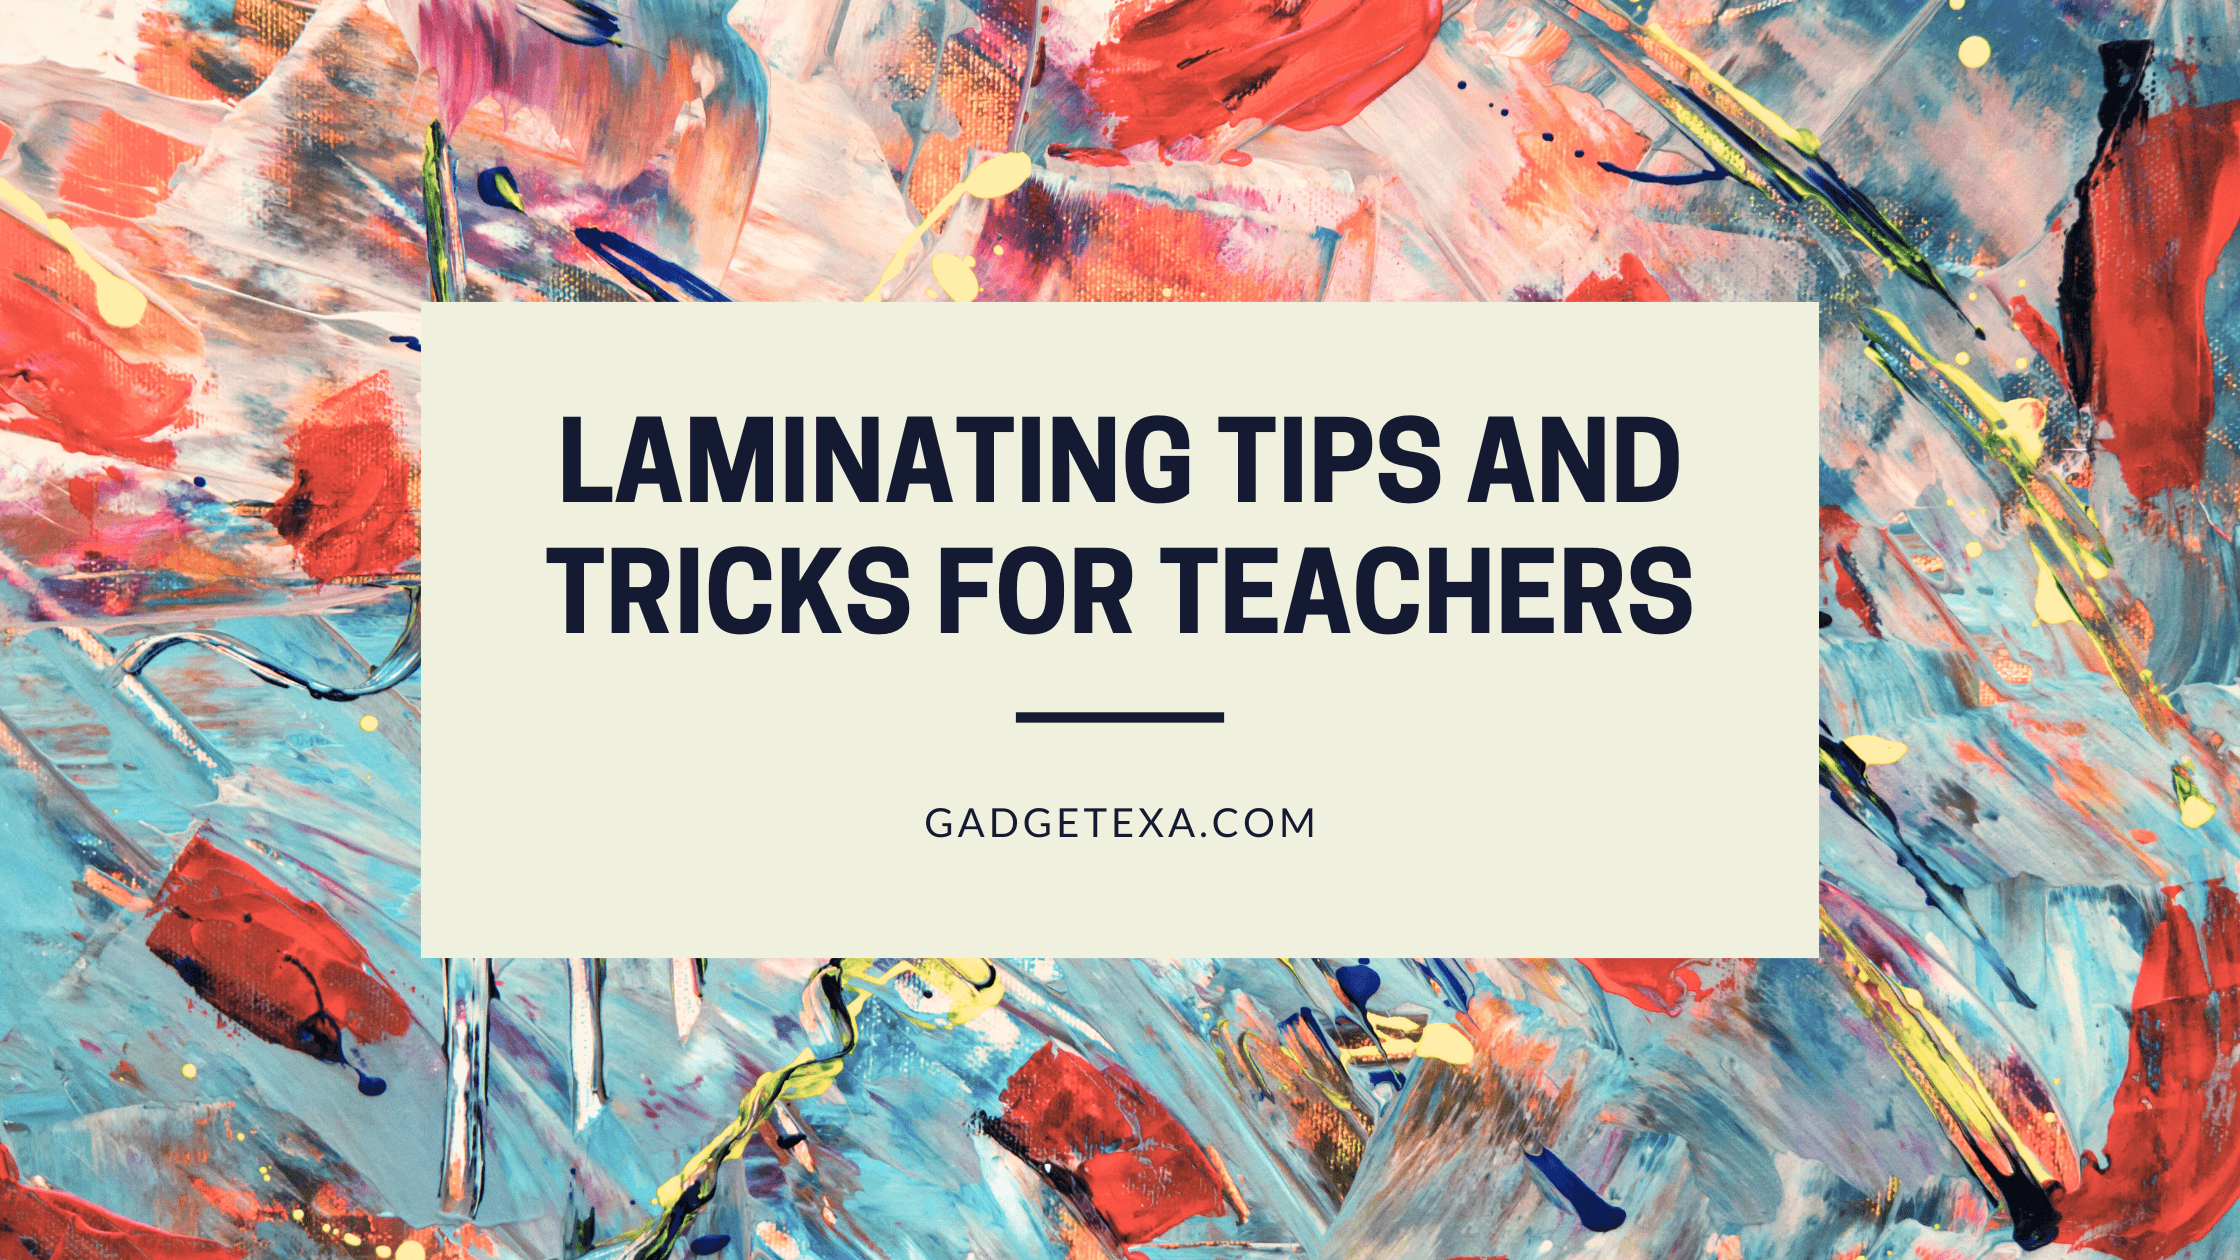 Laminating Tips and Tricks for Teachers